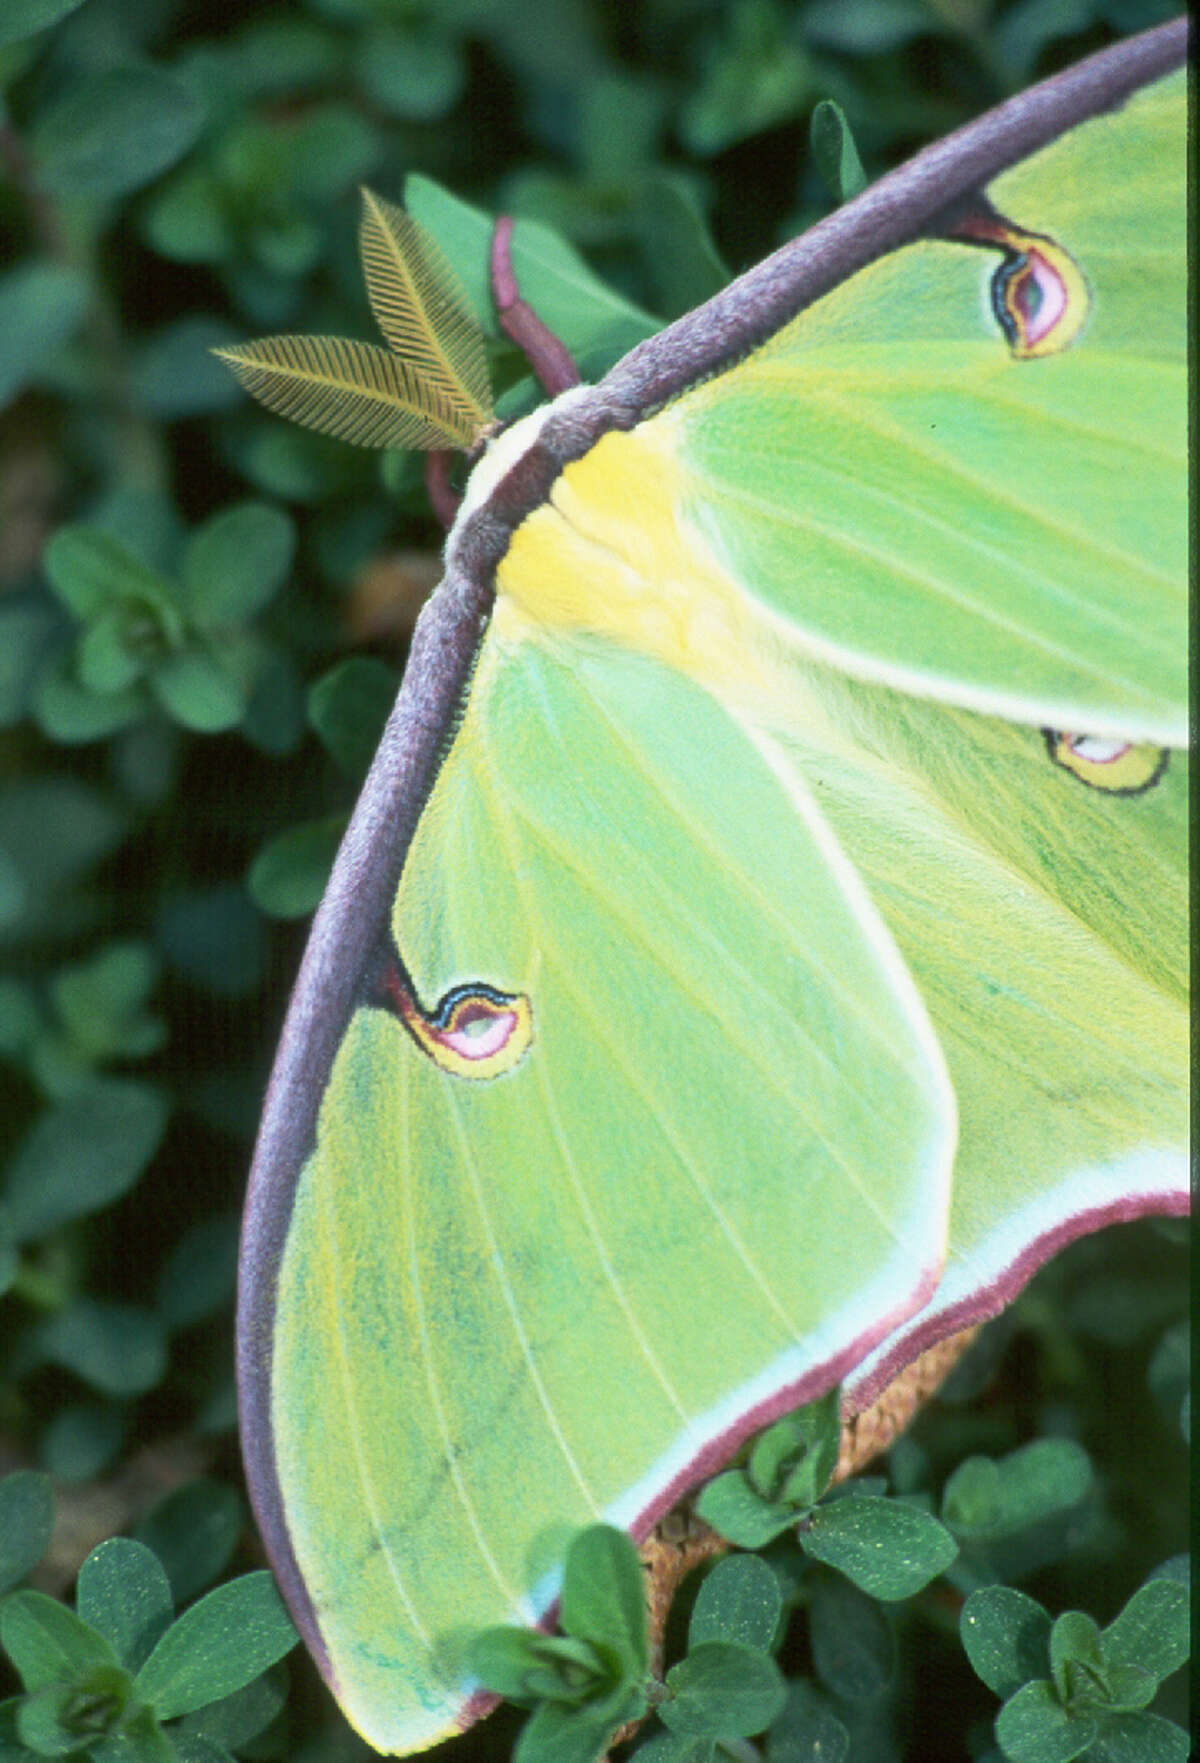 The elegant Luna moth, left, could accurately be called a "butterfly of the night."